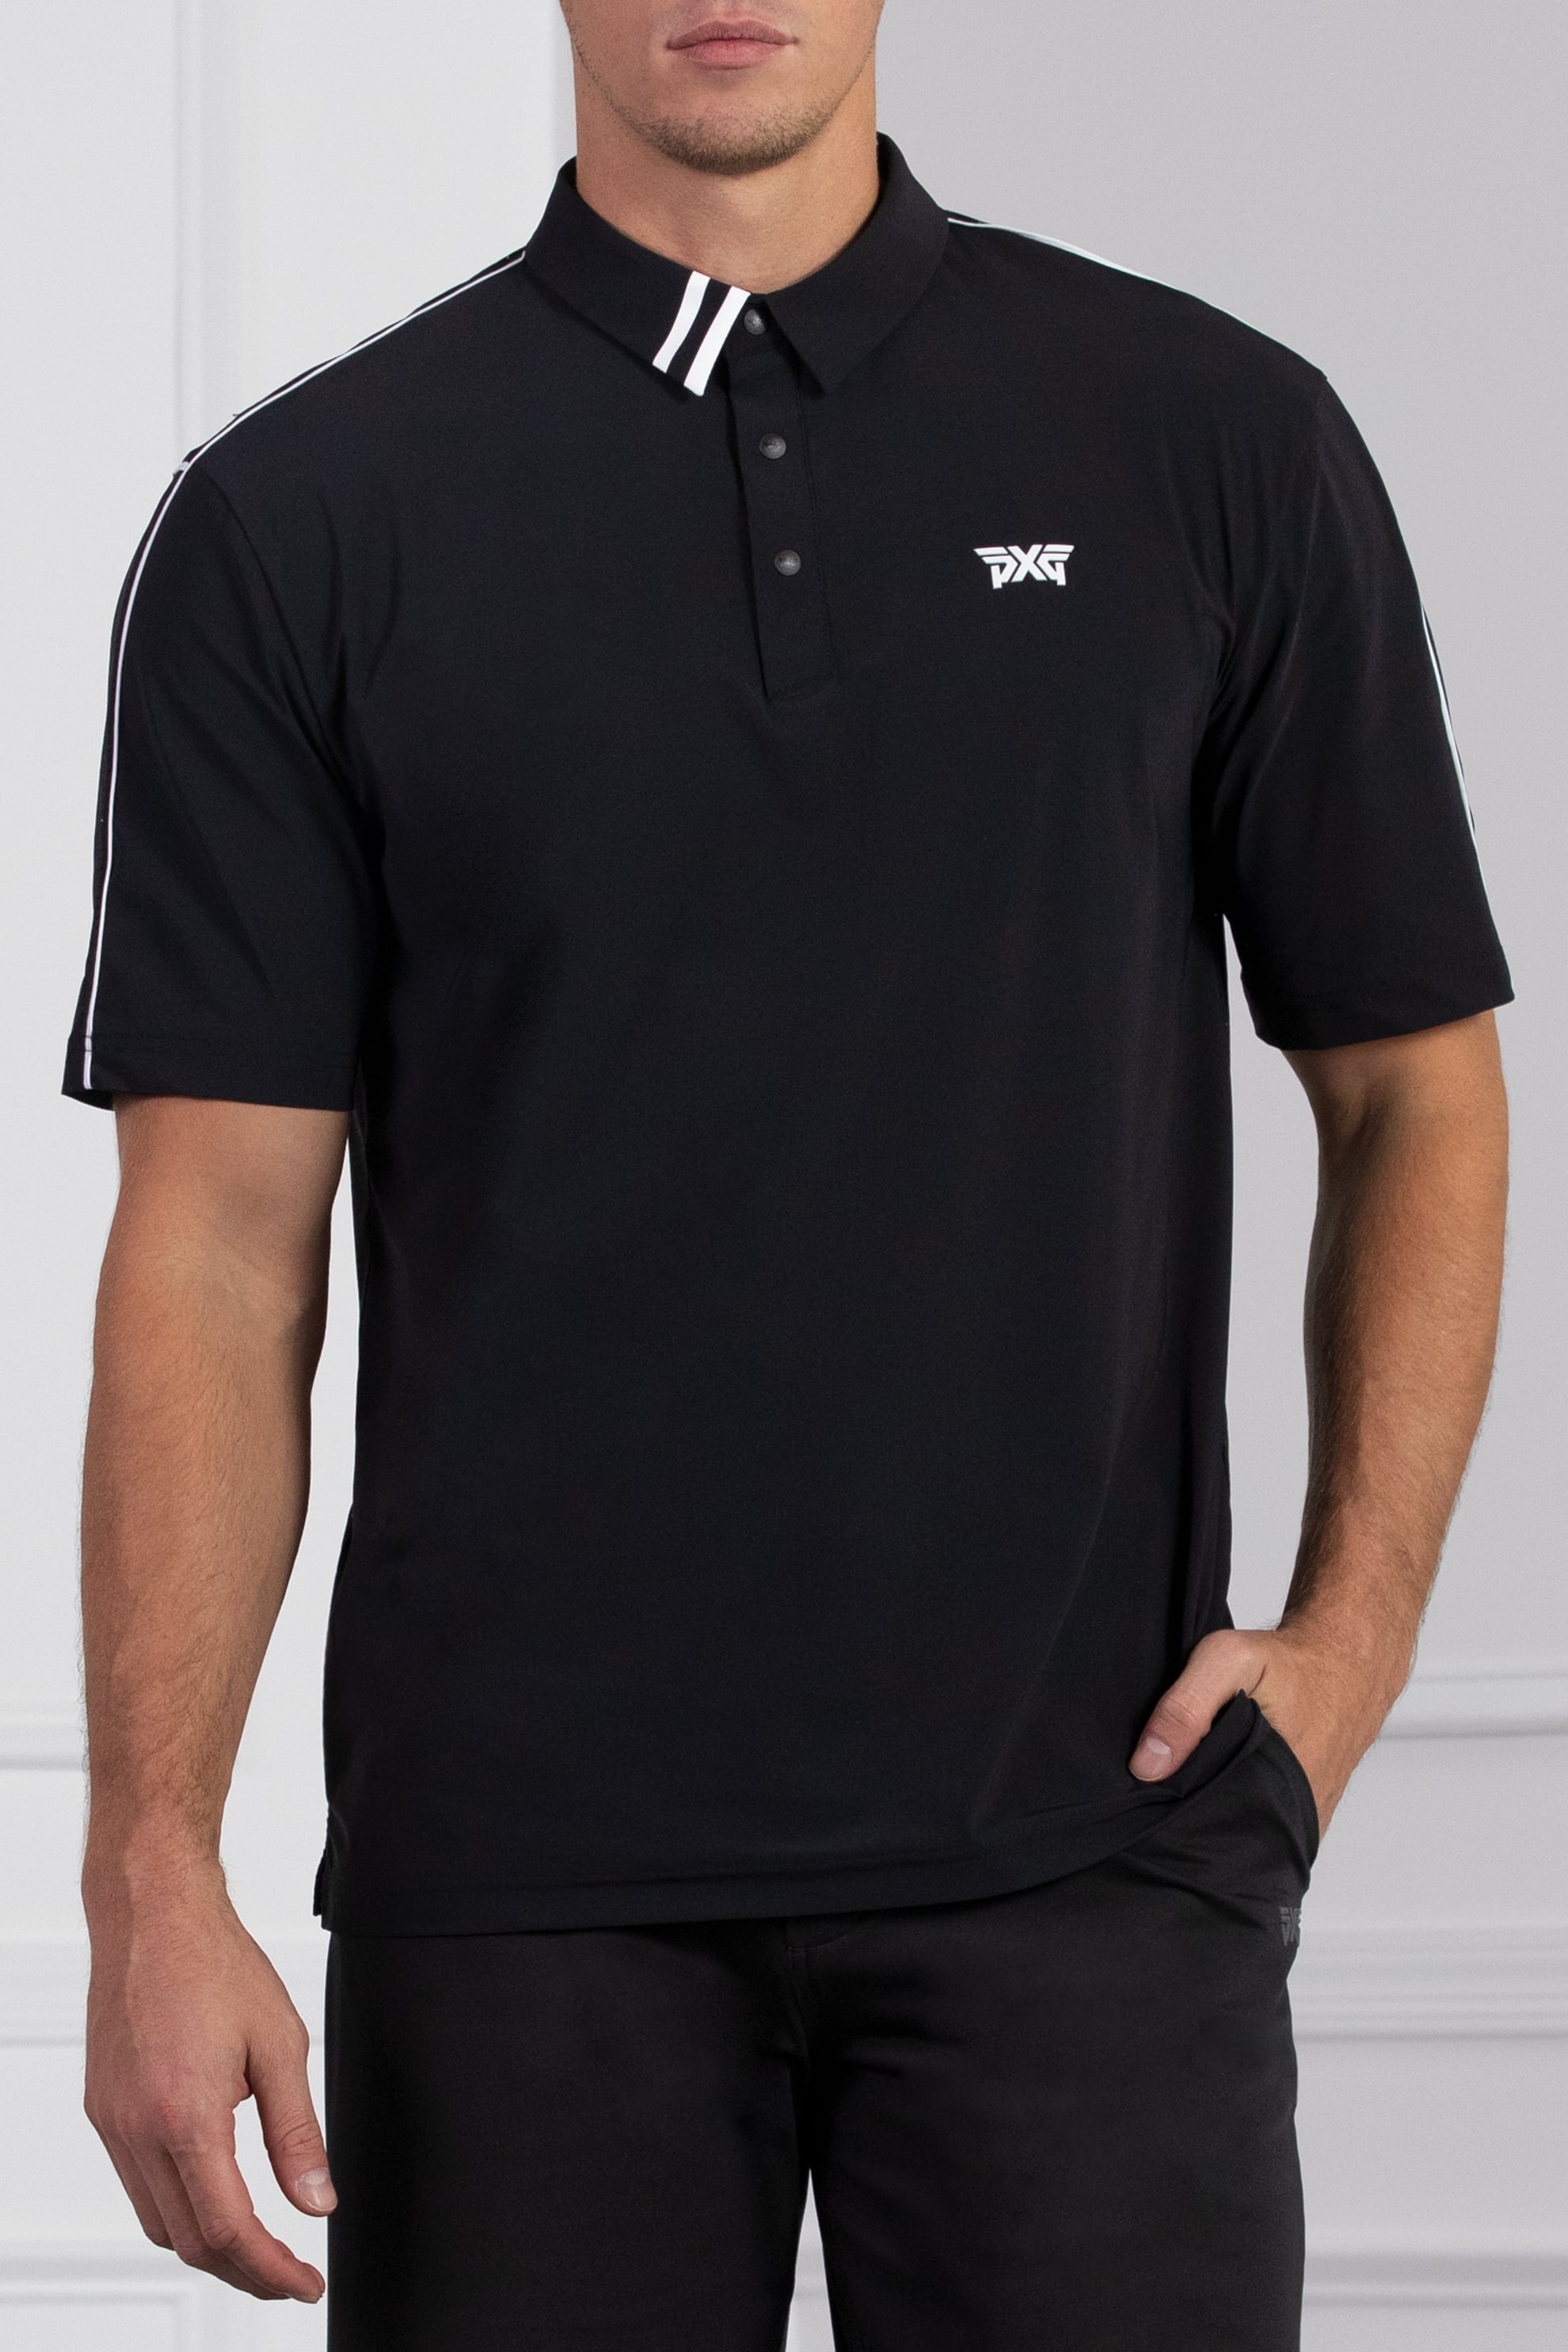 | Comfort Accessories Quality Golf Apparel, Fit Fineline at Shop PXG and Golf Polo Clubs the Highest Gear,